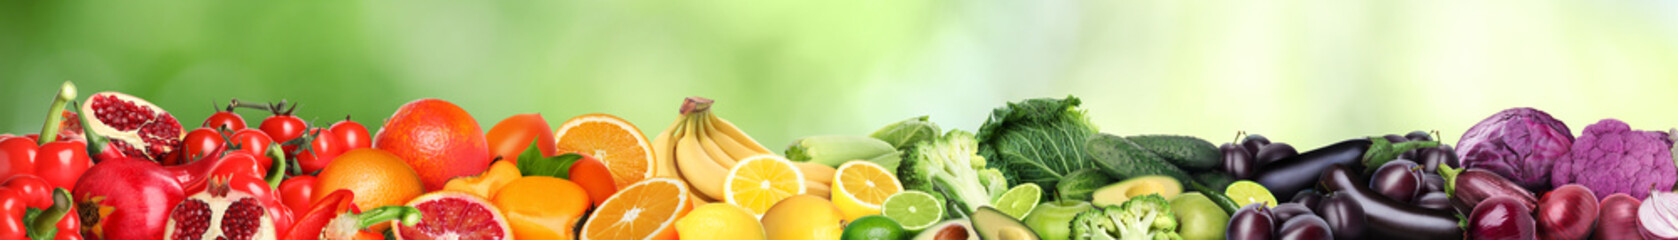 Many different fresh fruits and vegetables against blurred green background. Banner design